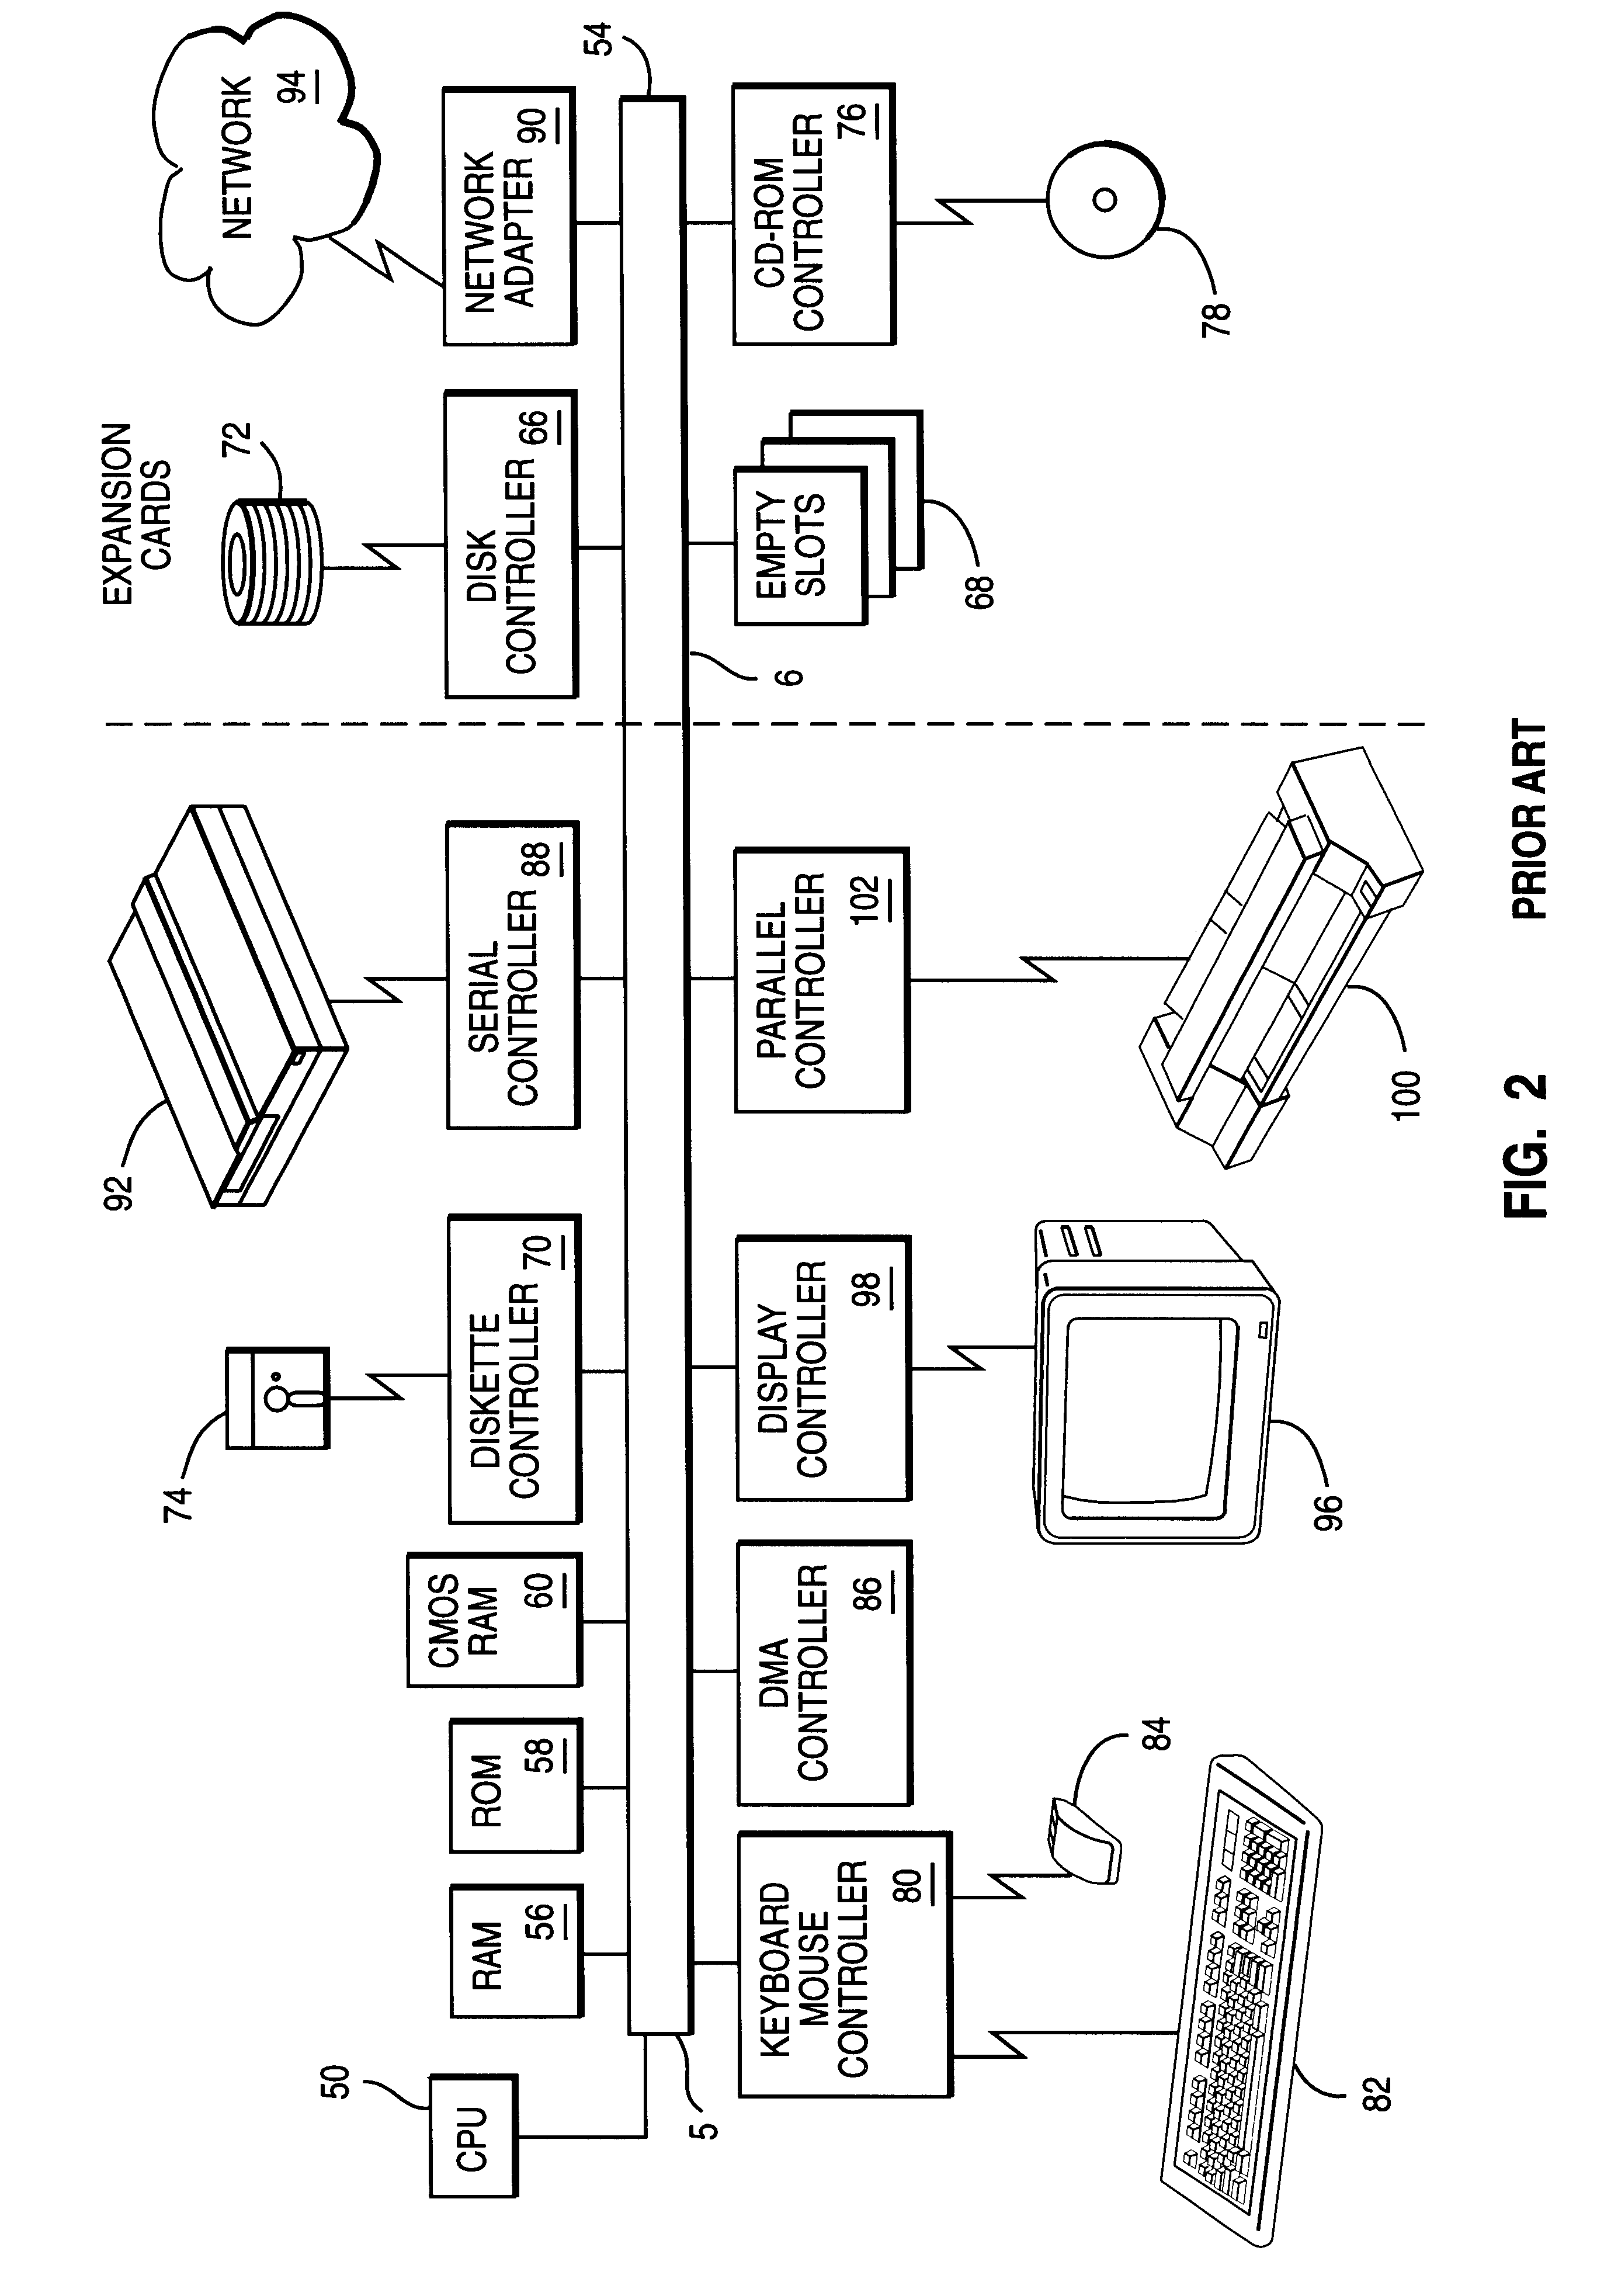 Method and apparatus for detecting actual viewing of electronic advertisements